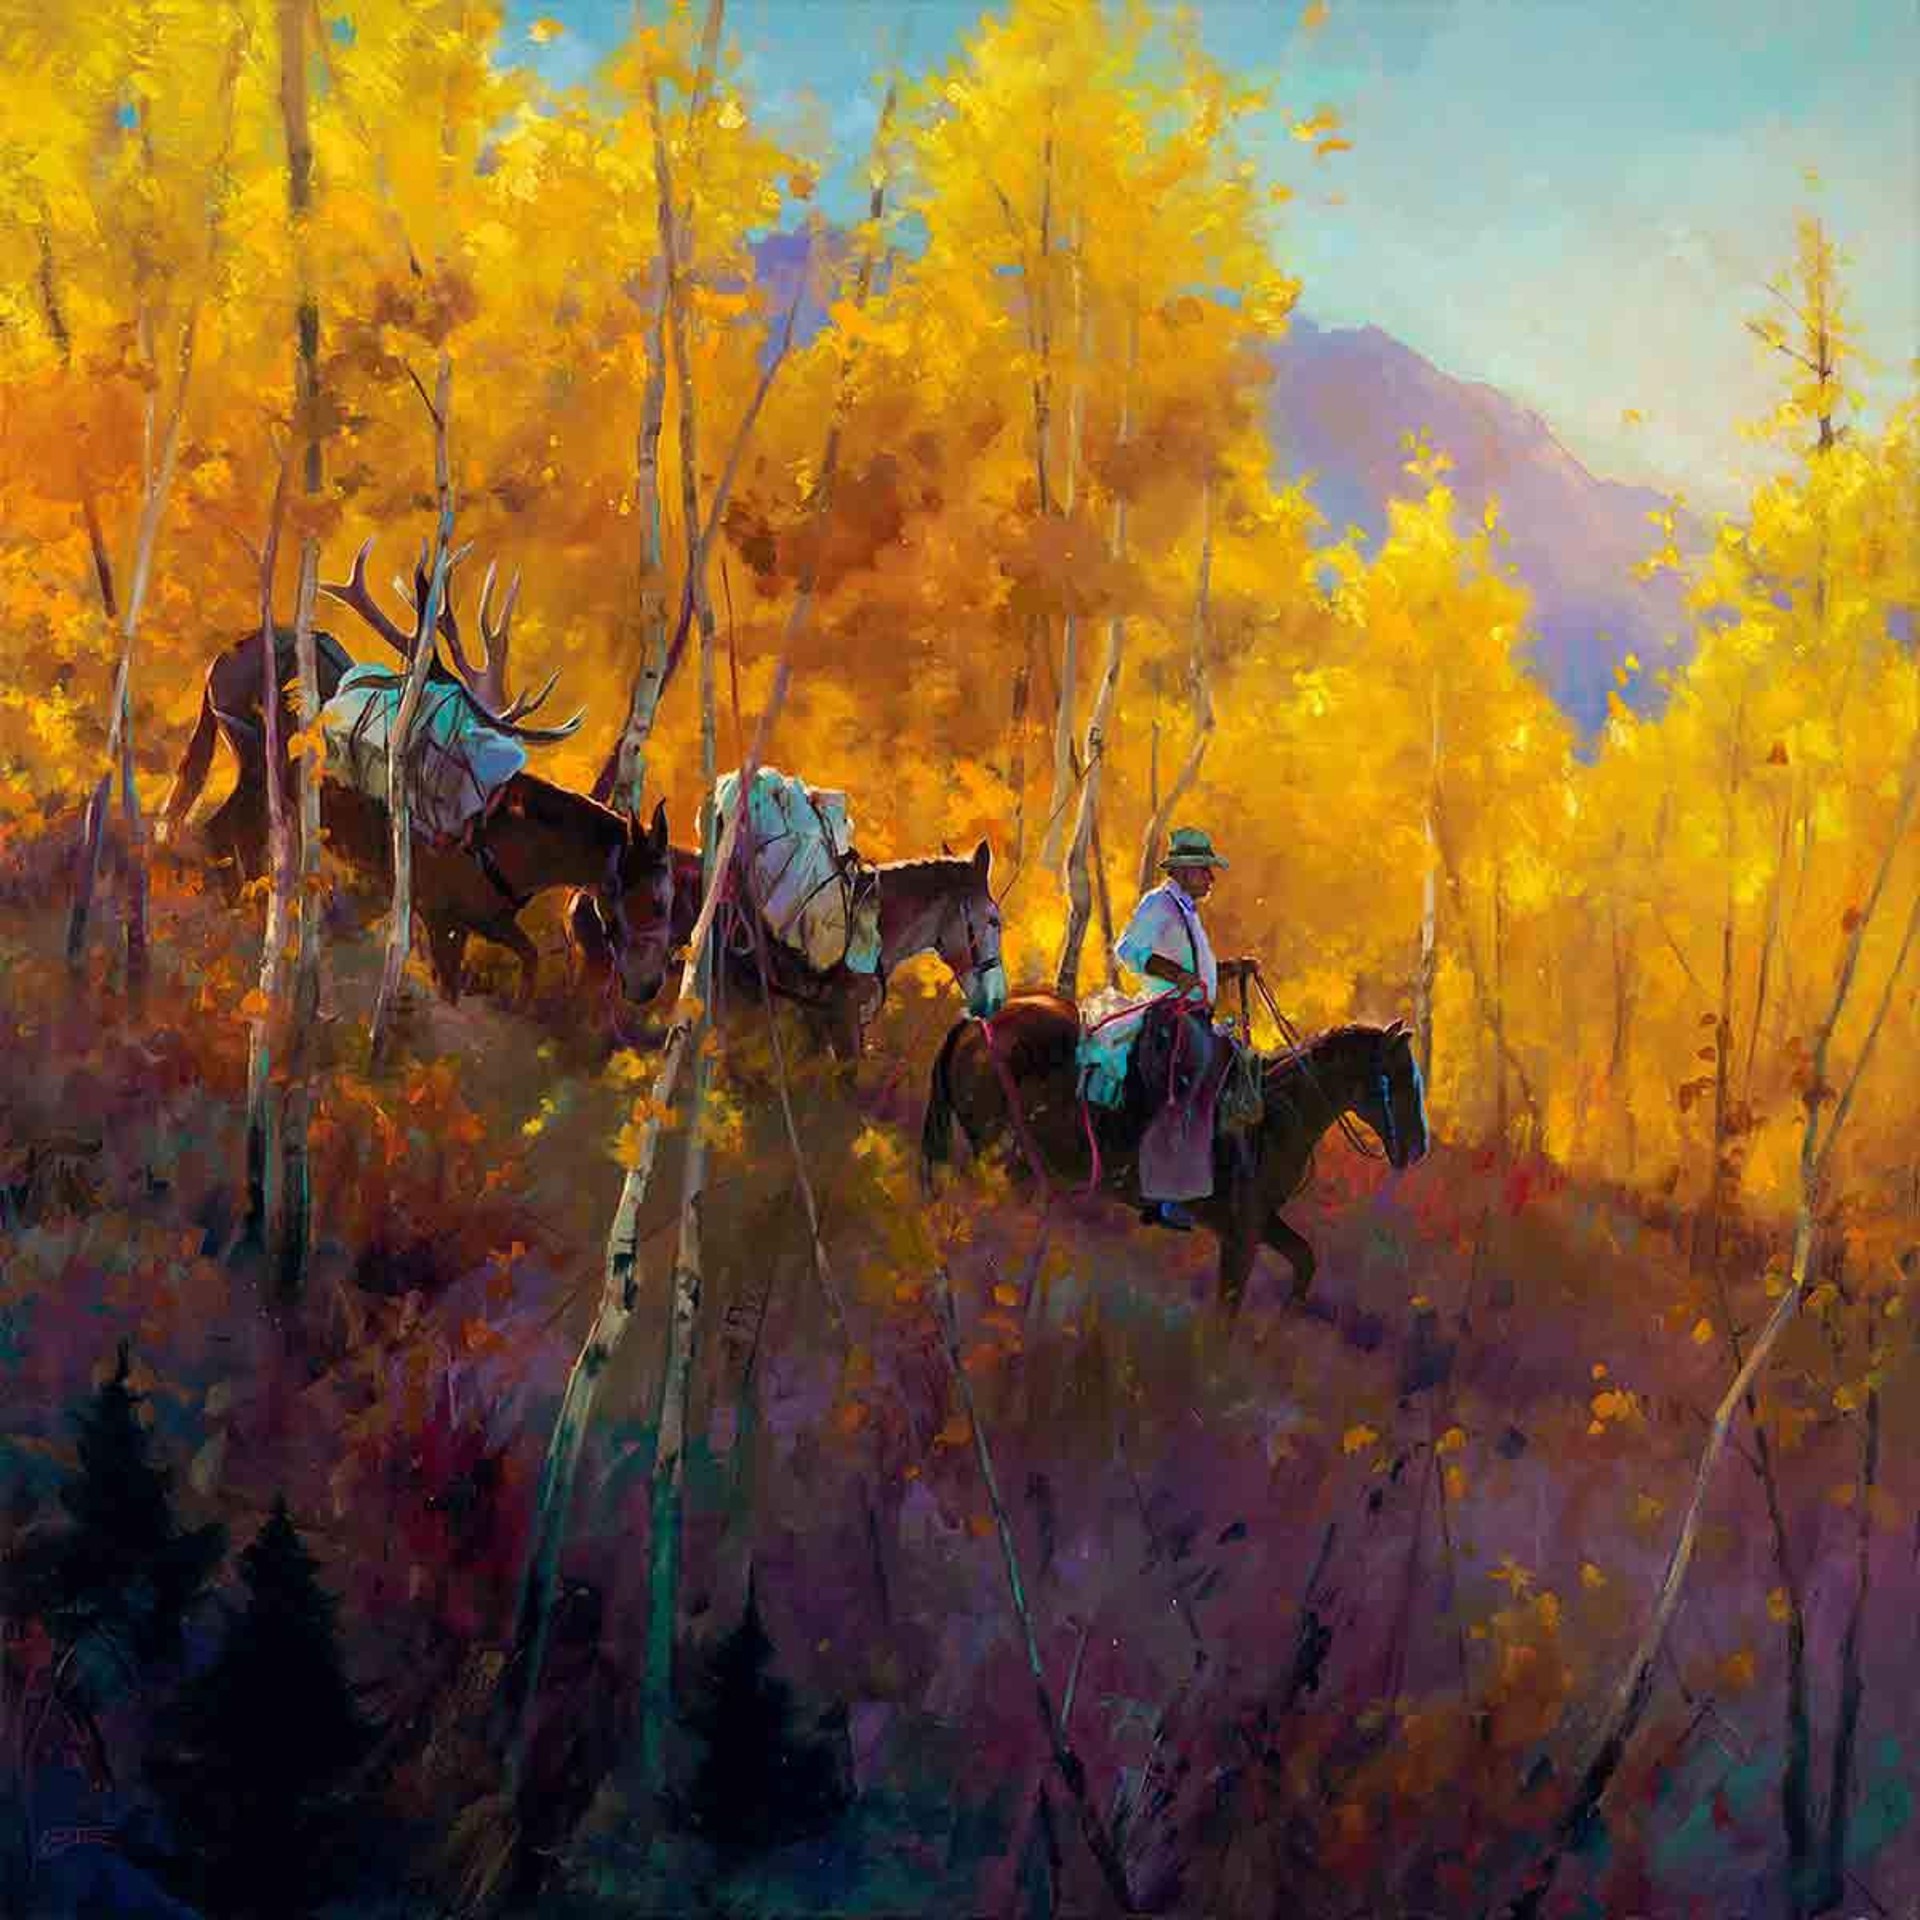 Along the Golden Trail by Colt Idol